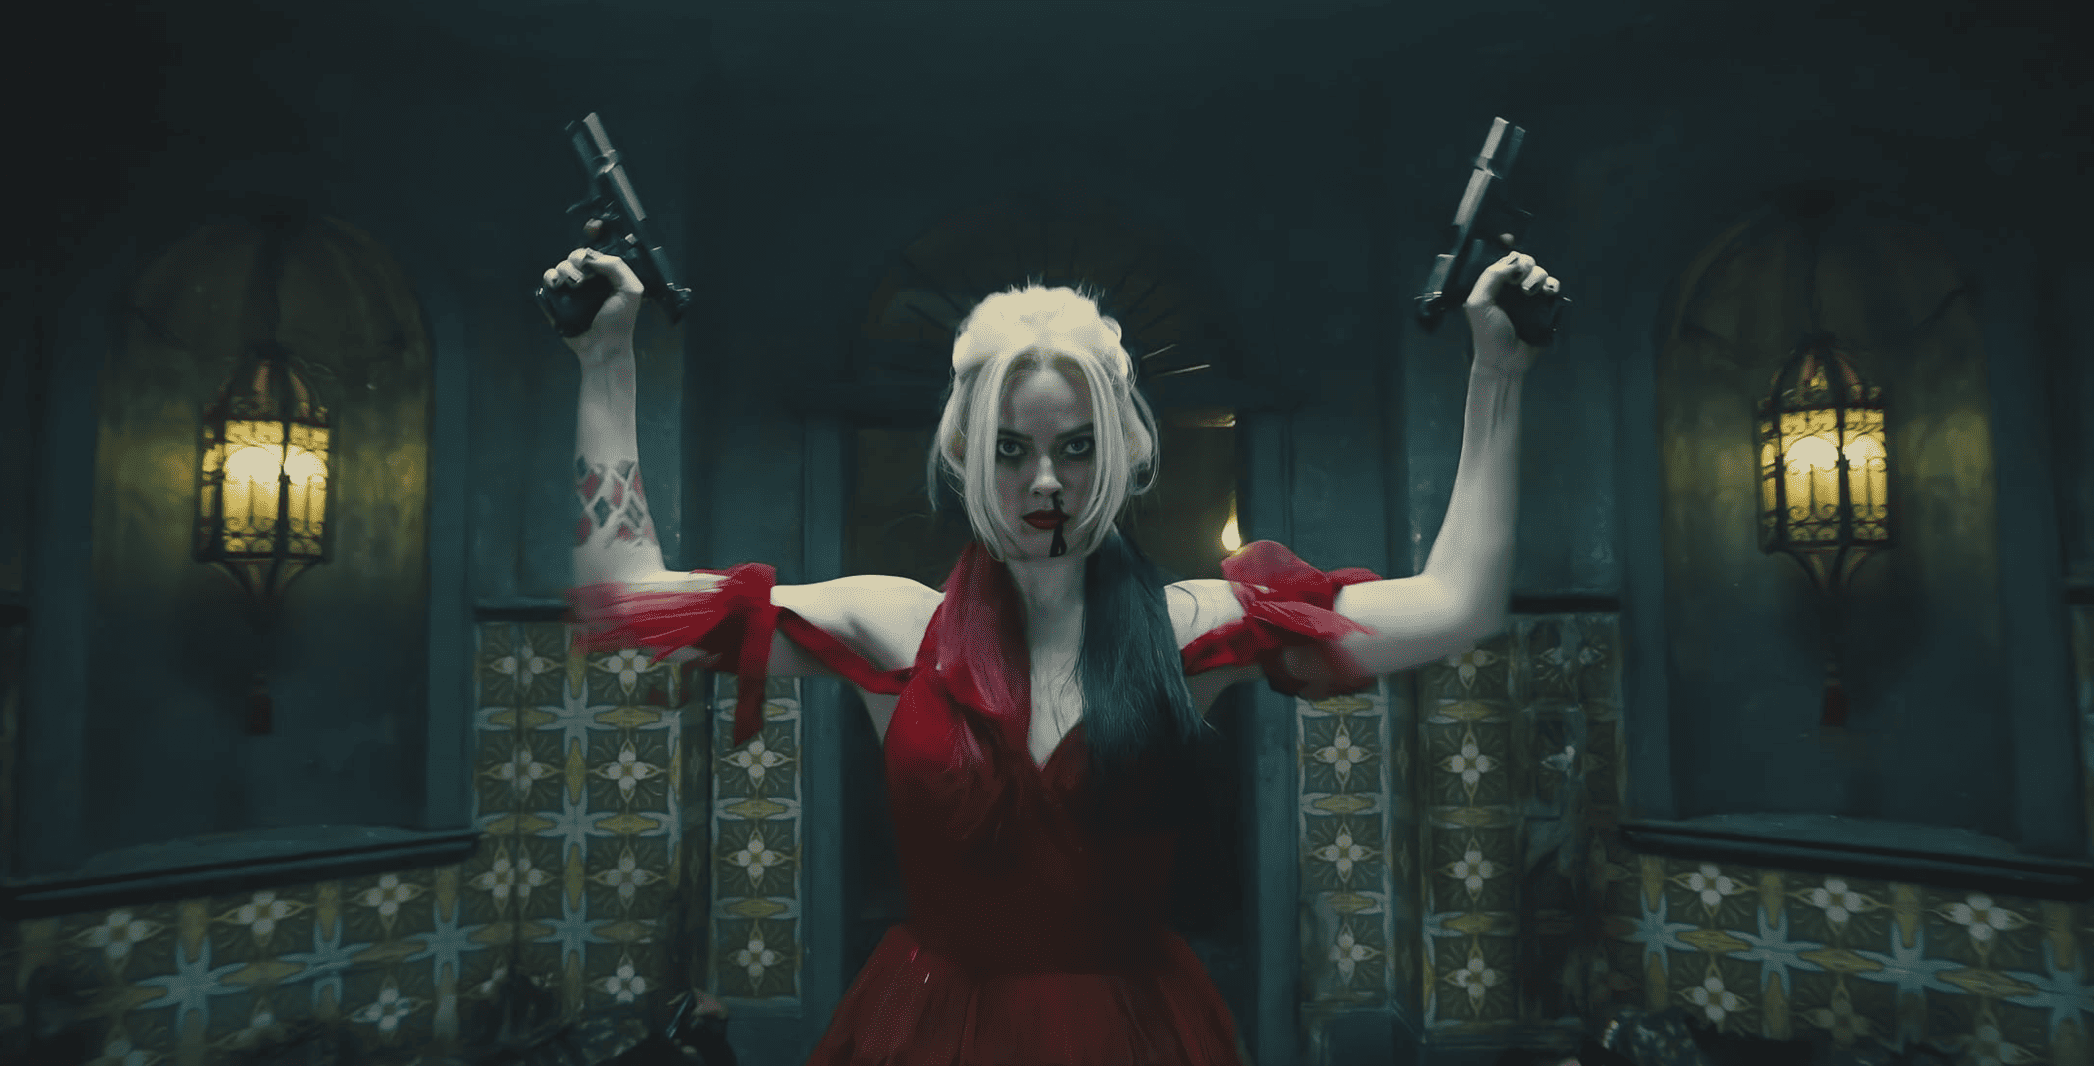 Harley in a red dress and a gun in each hand in this image from DC Entertainment